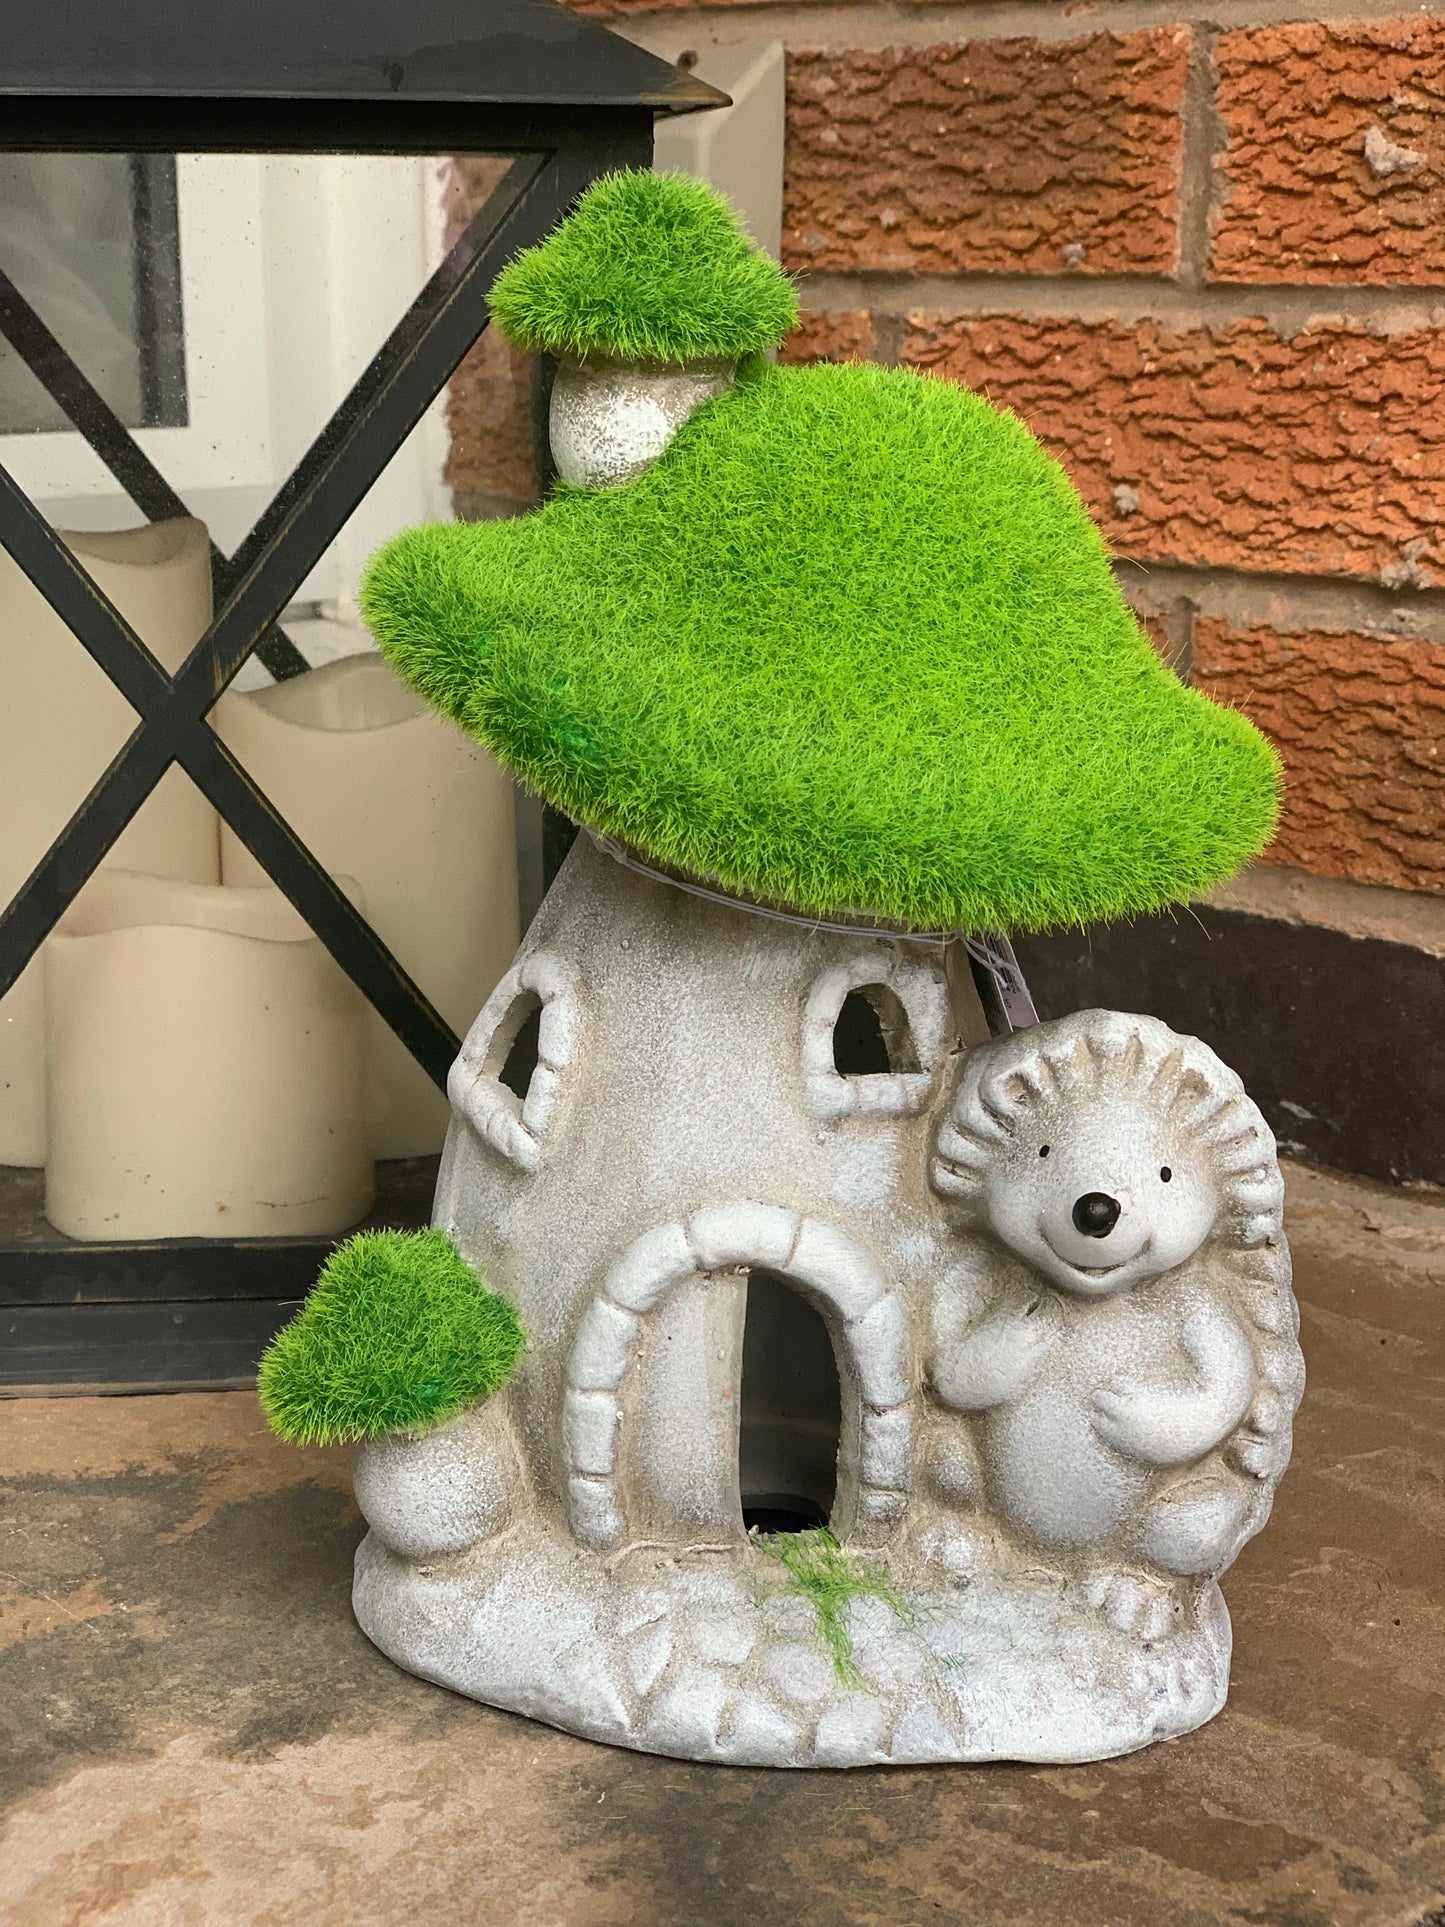 Grassy Toadstool House with hedgehog